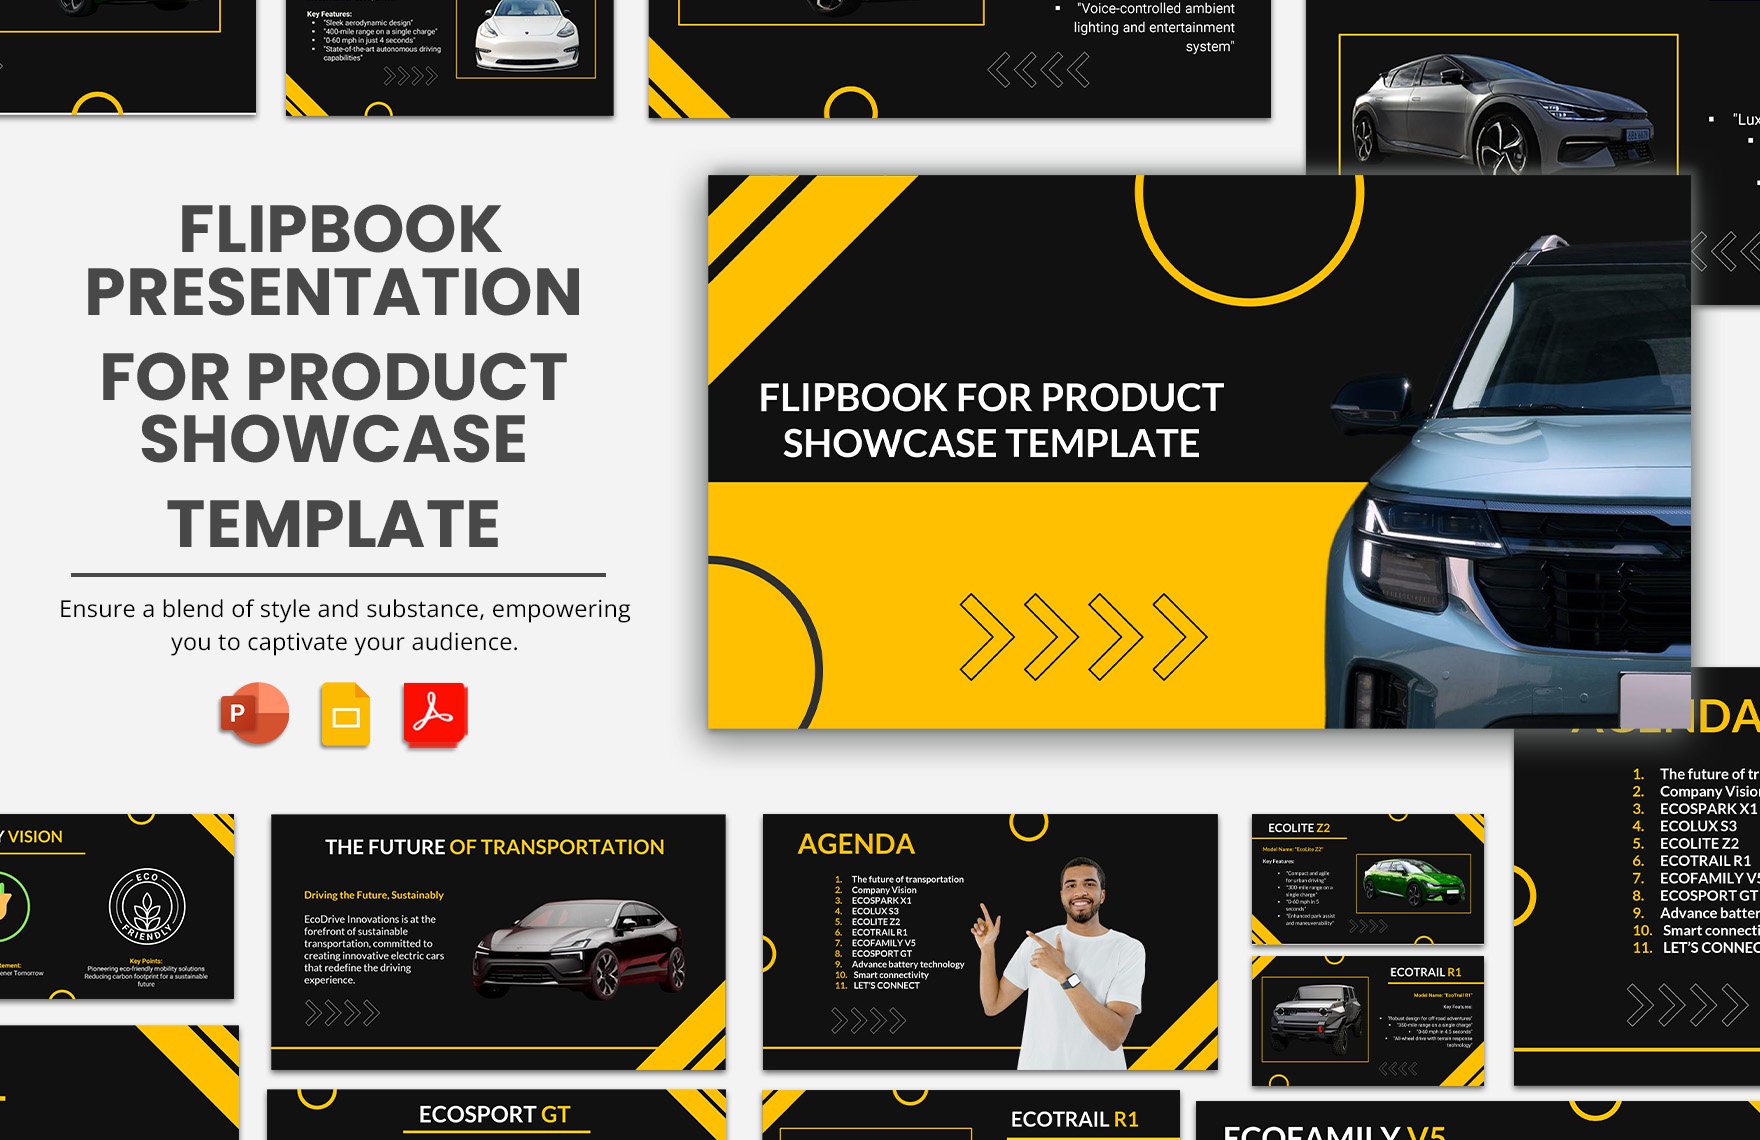 Flipbook Presentation for Product Showcase Template